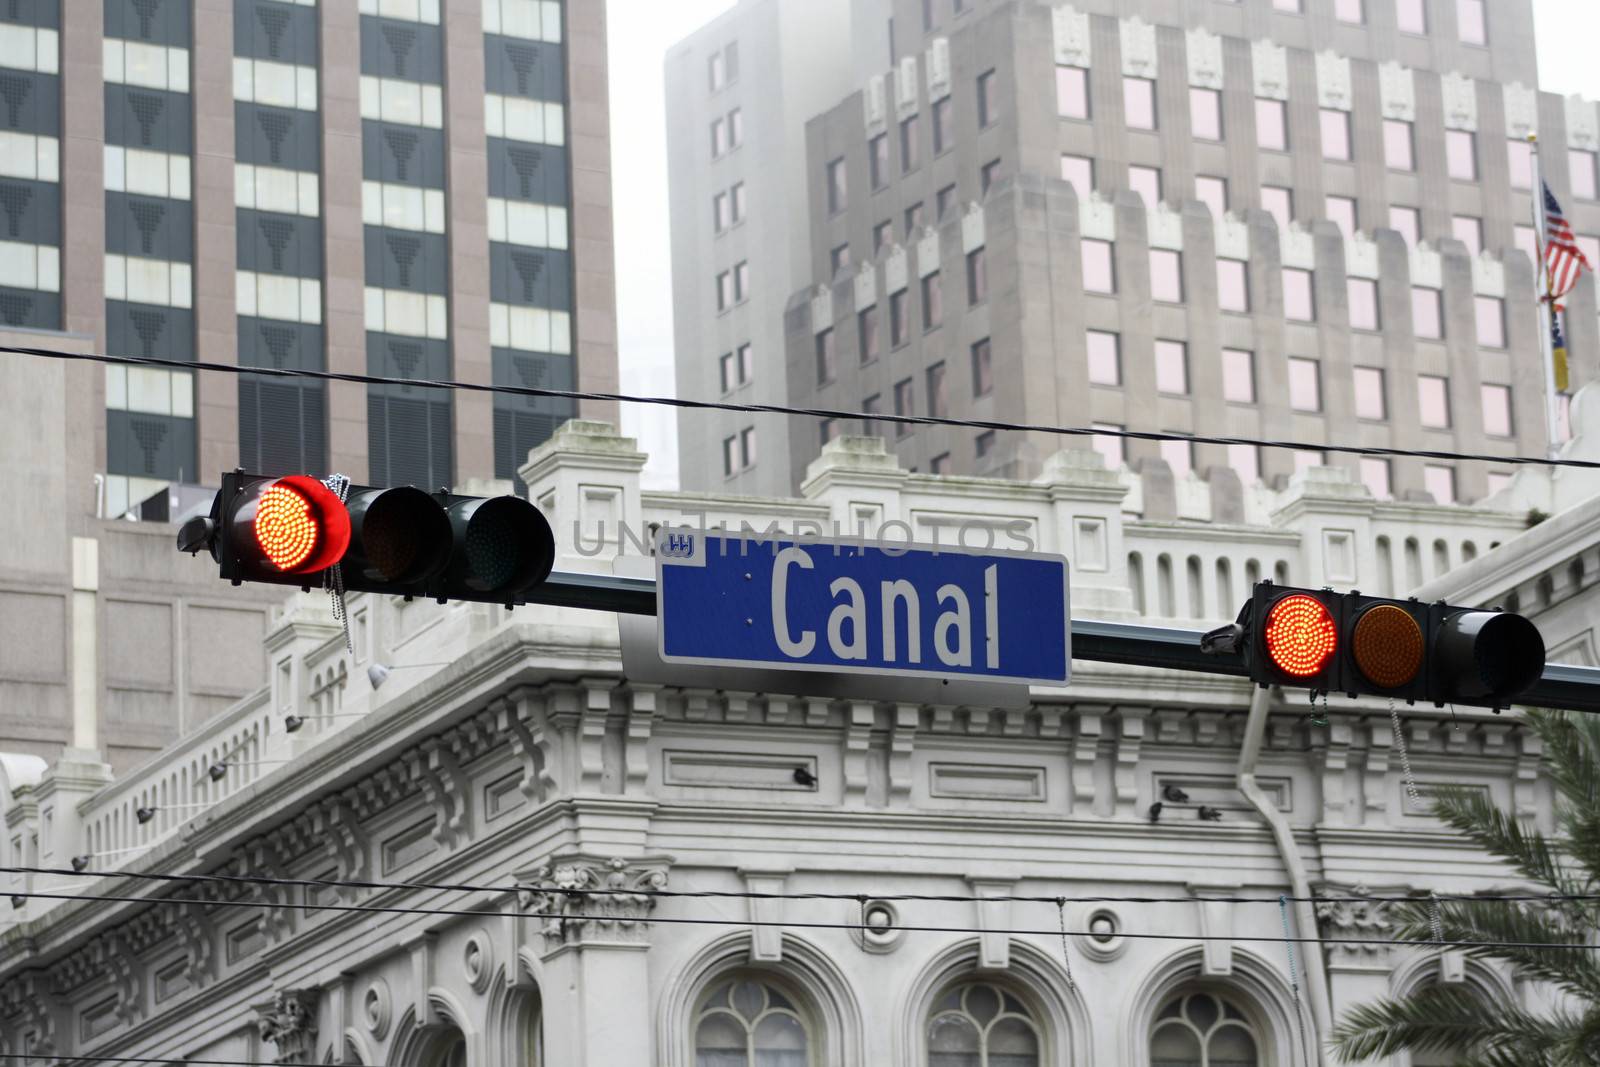 Canal Street stoplight with buildings in the background